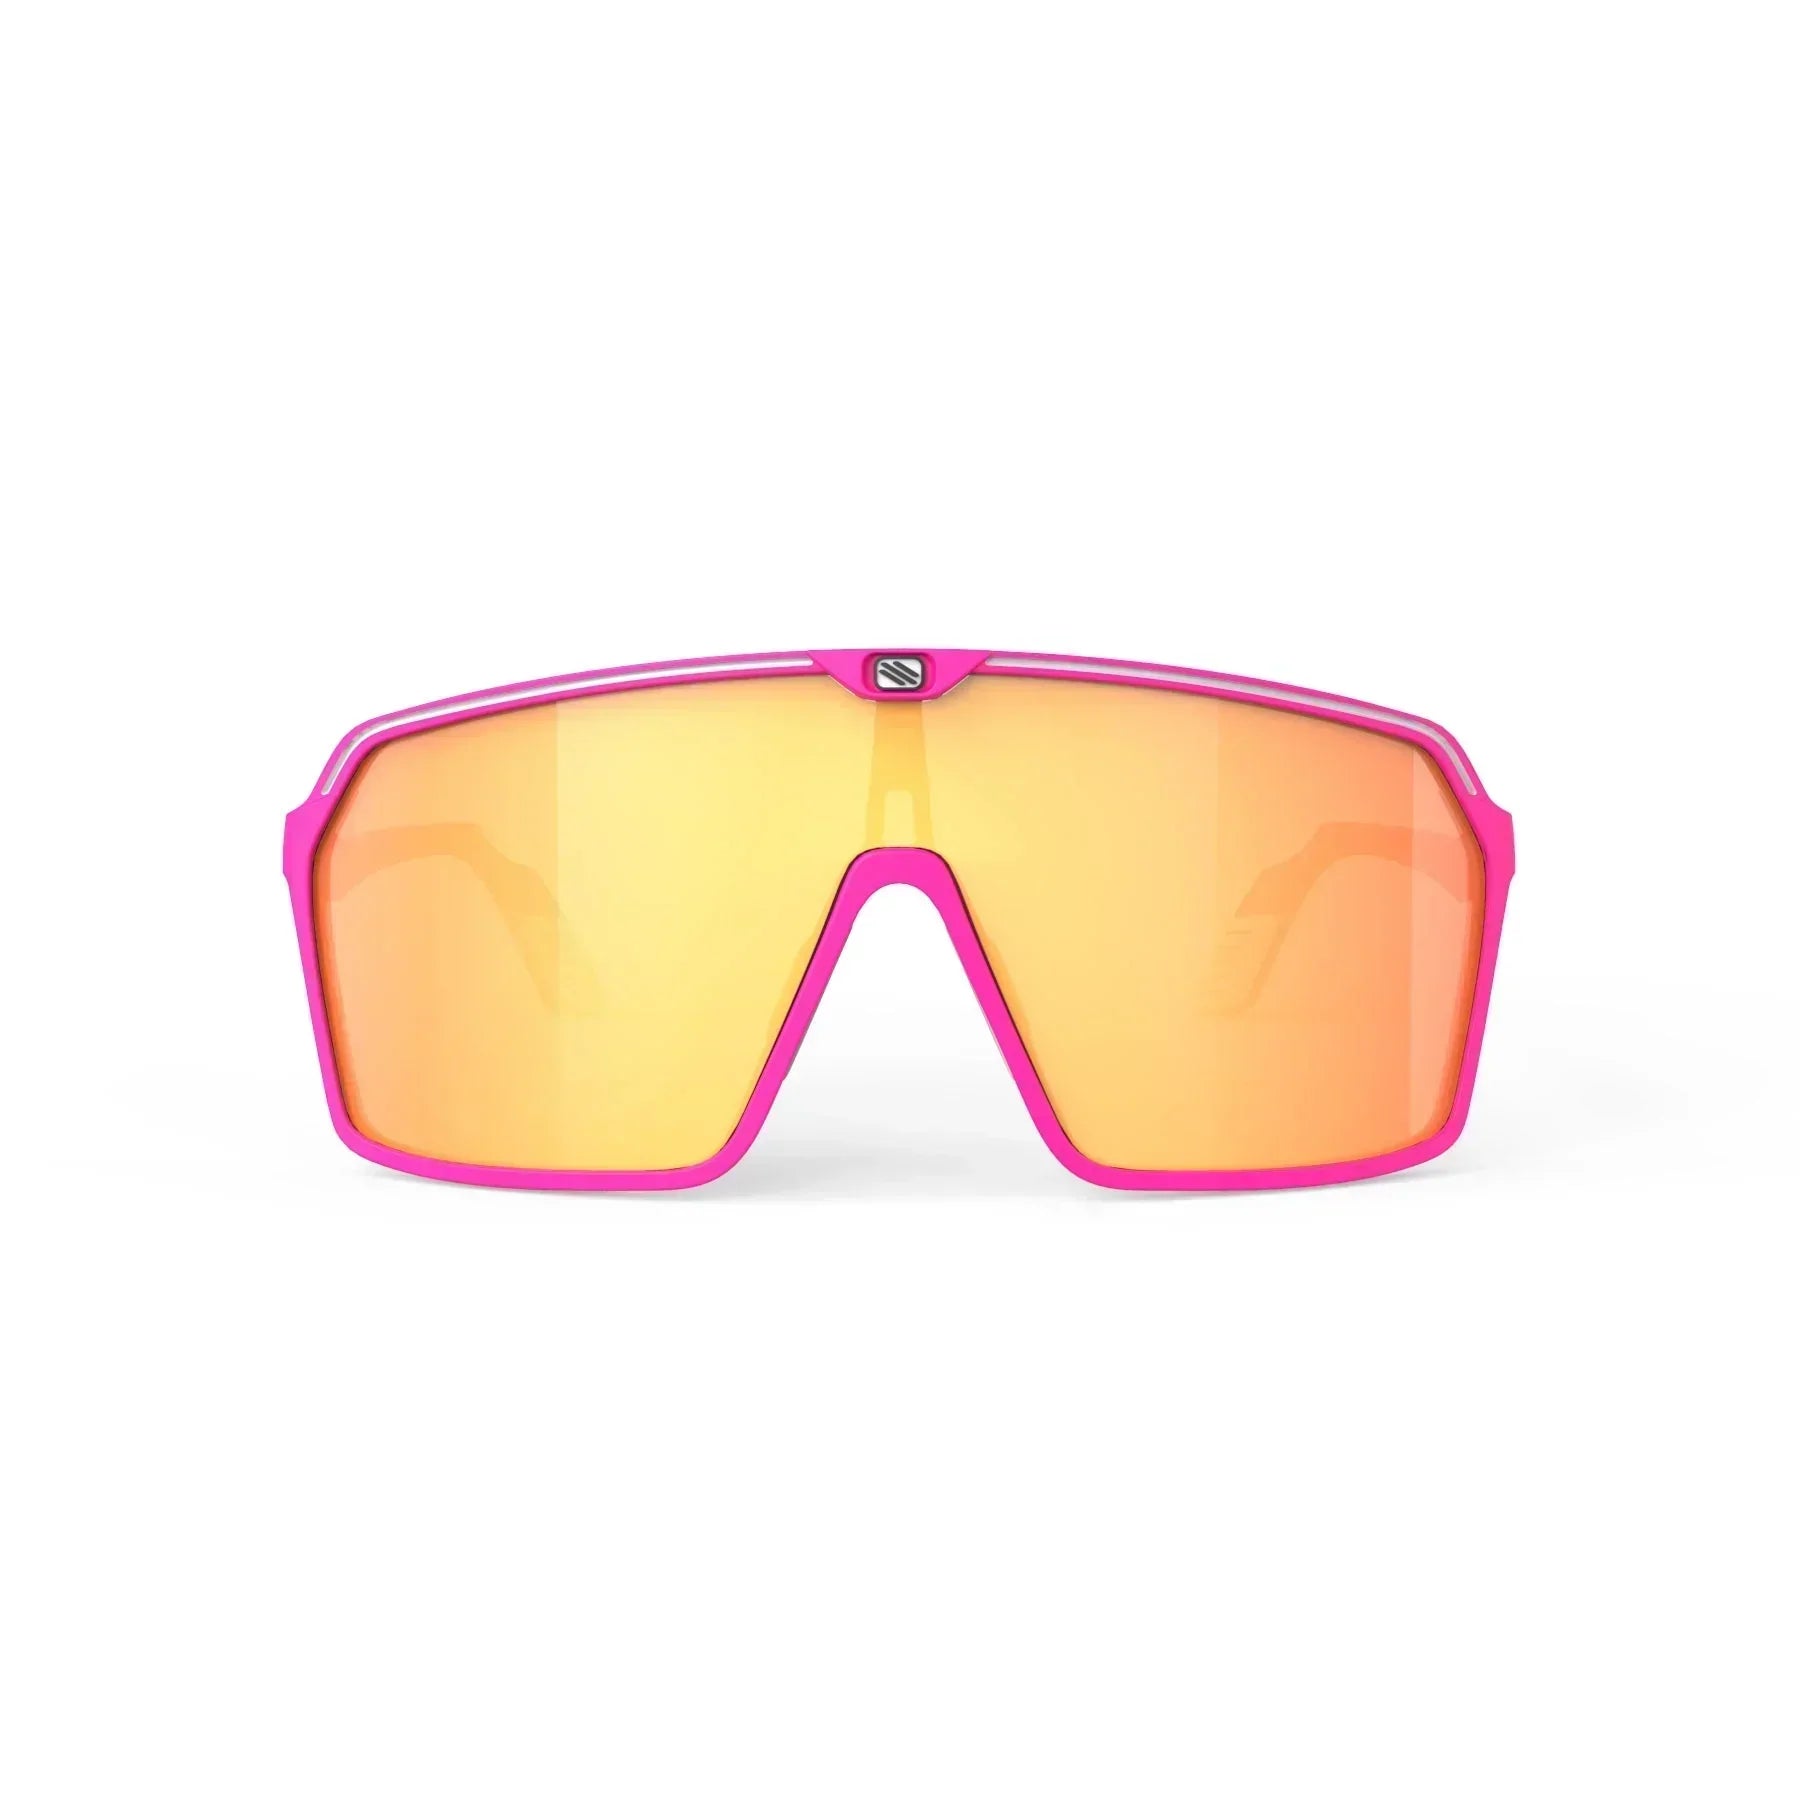 Rudy Project Spinshield running and cycling sunglasses#color_spinshield-pink-fluo-with-multilaser-orange-lenses